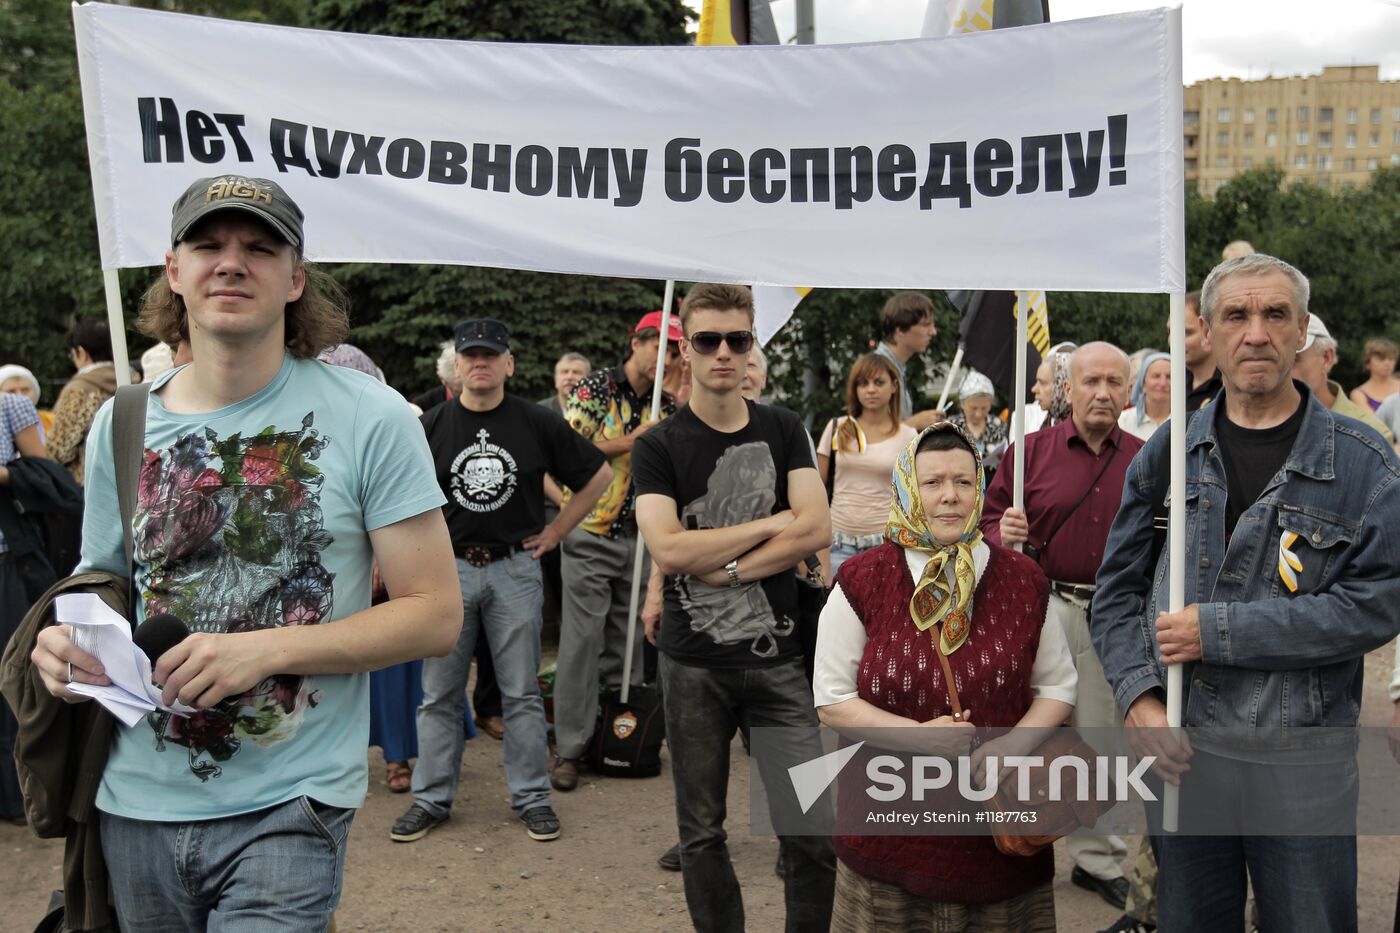 Rally in support of Russian Orthodox Church